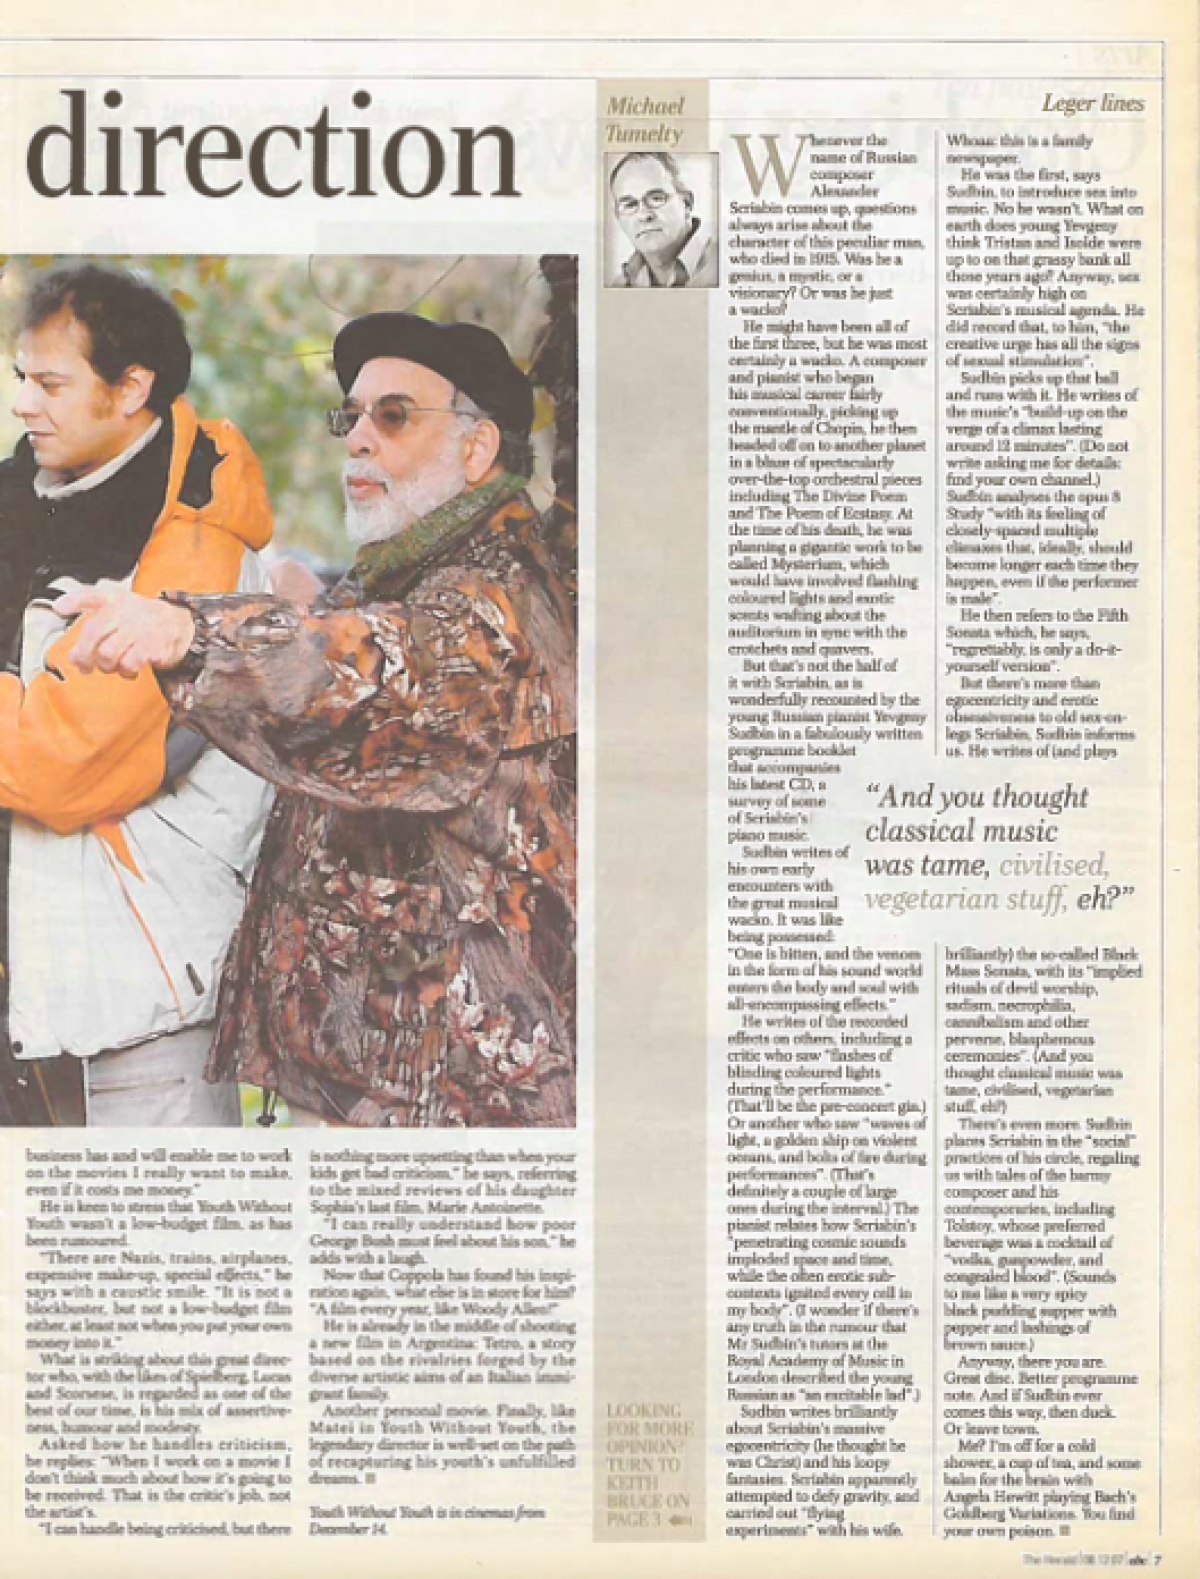 A Complex Sense of Direction, Francis Ford Coppola Interview pg 2, by Francesca Lombardo